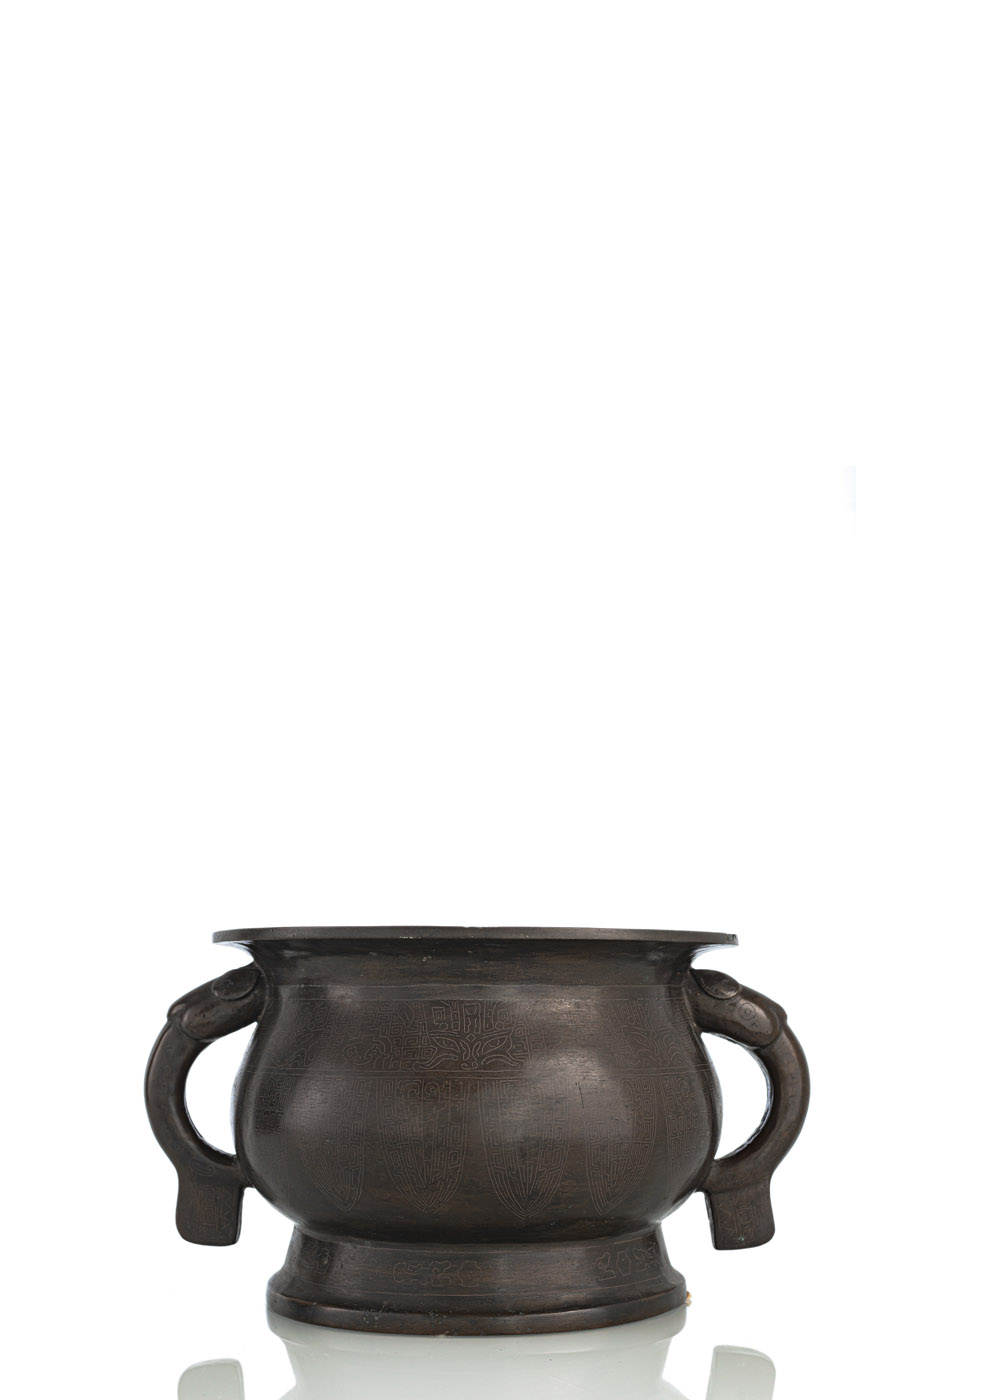 <b>A BRONZE CENSER 'GUI' WITH SILVER INLAYS IN ARCHAIC STYLE</b>